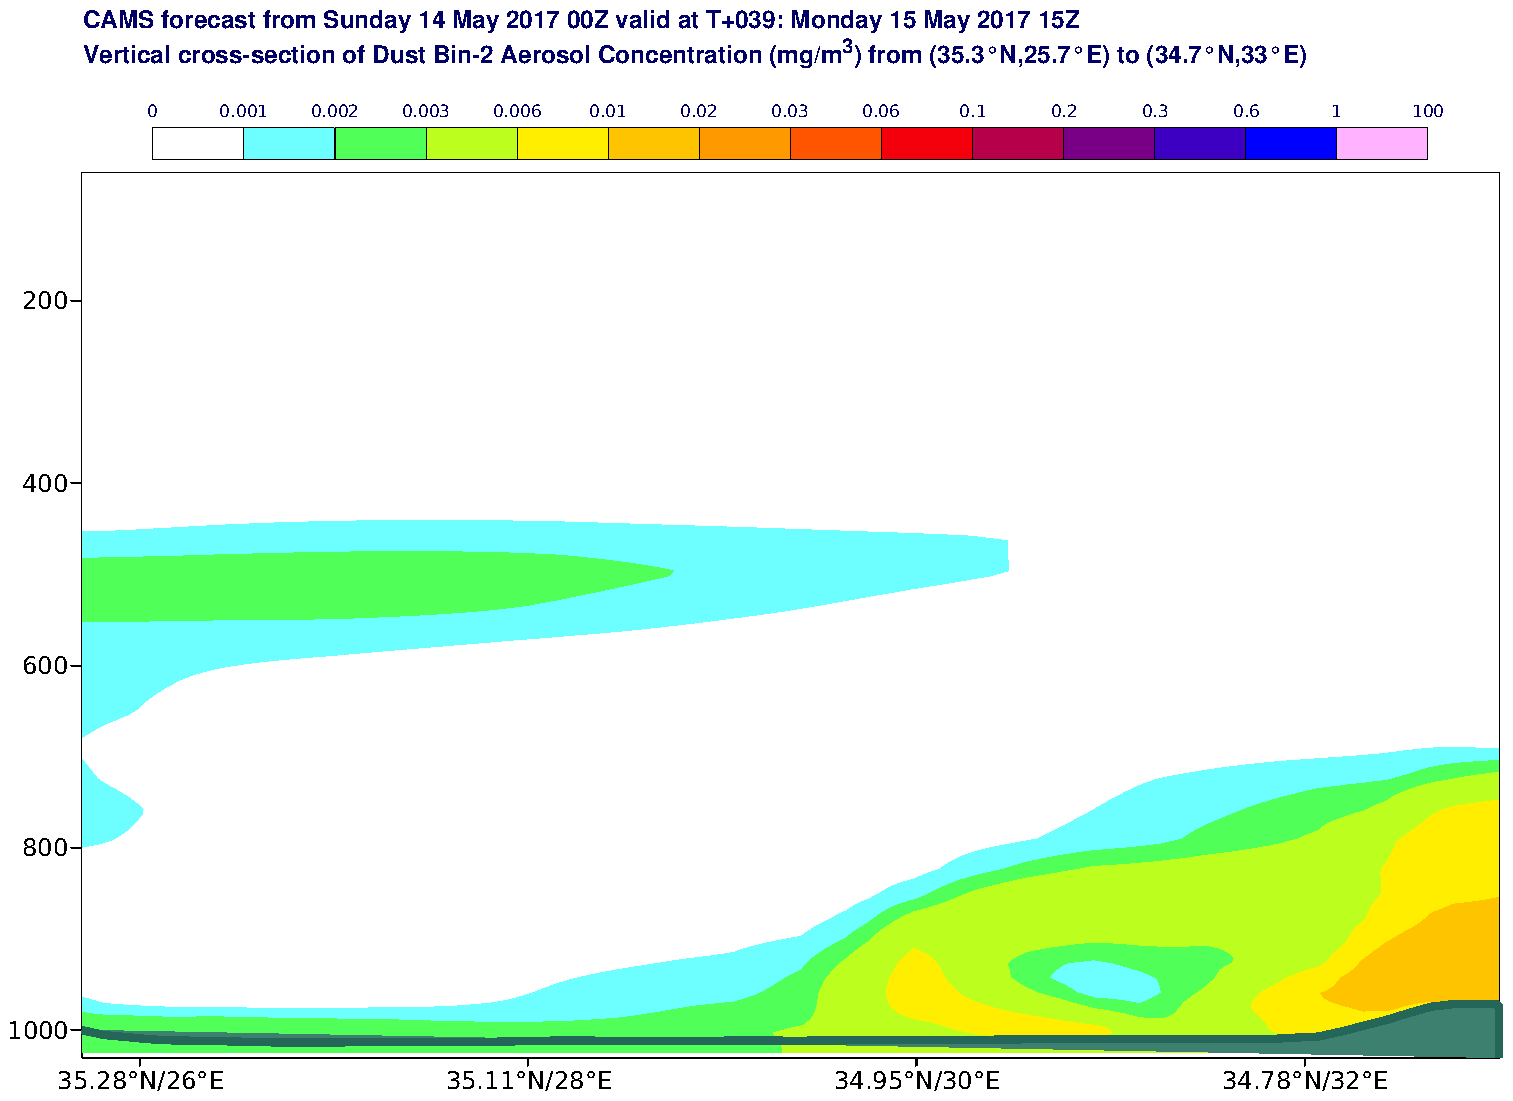 Vertical cross-section of Dust Bin-2 Aerosol Concentration (mg/m3) valid at T39 - 2017-05-15 15:00